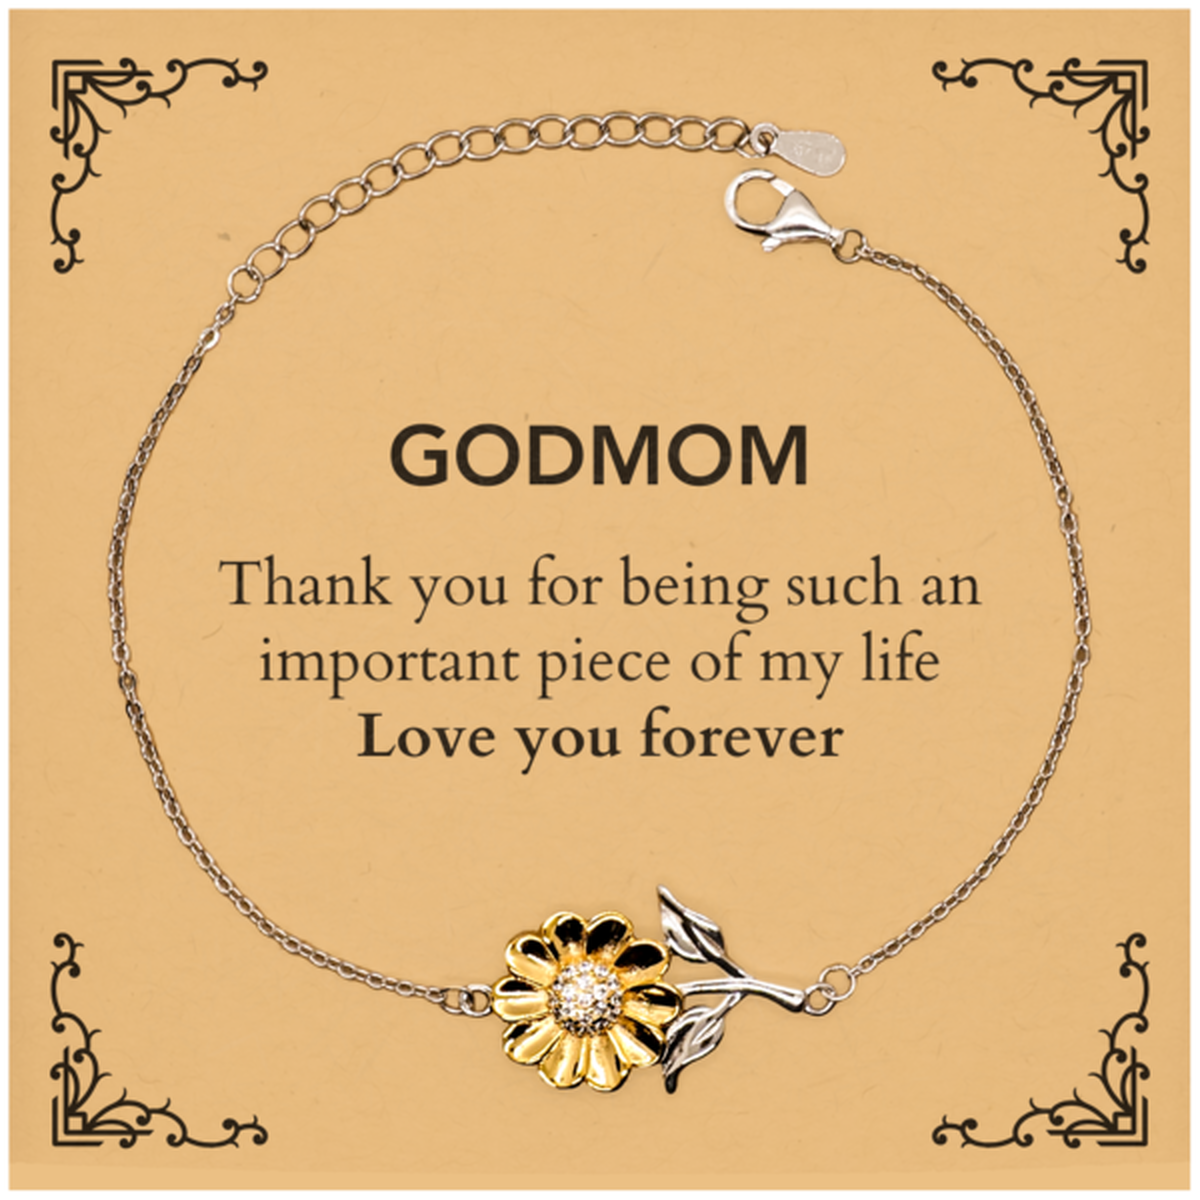 Appropriate Godmom Sunflower Bracelet Epic Birthday Gifts for Godmom Thank you for being such an important piece of my life Godmom Christmas Mothers Fathers Day